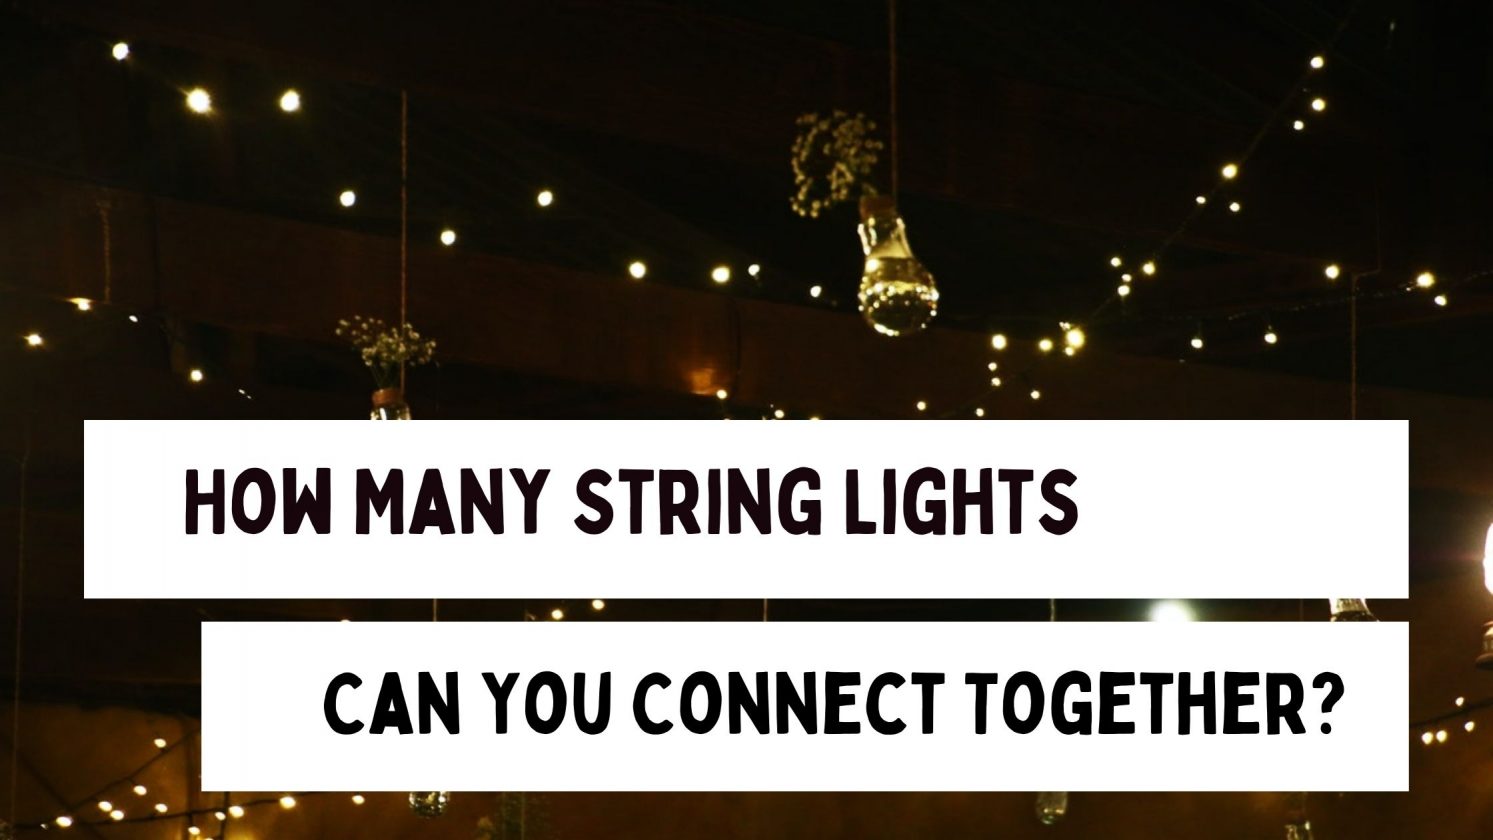 How Many String Lights Can You Connect Together?